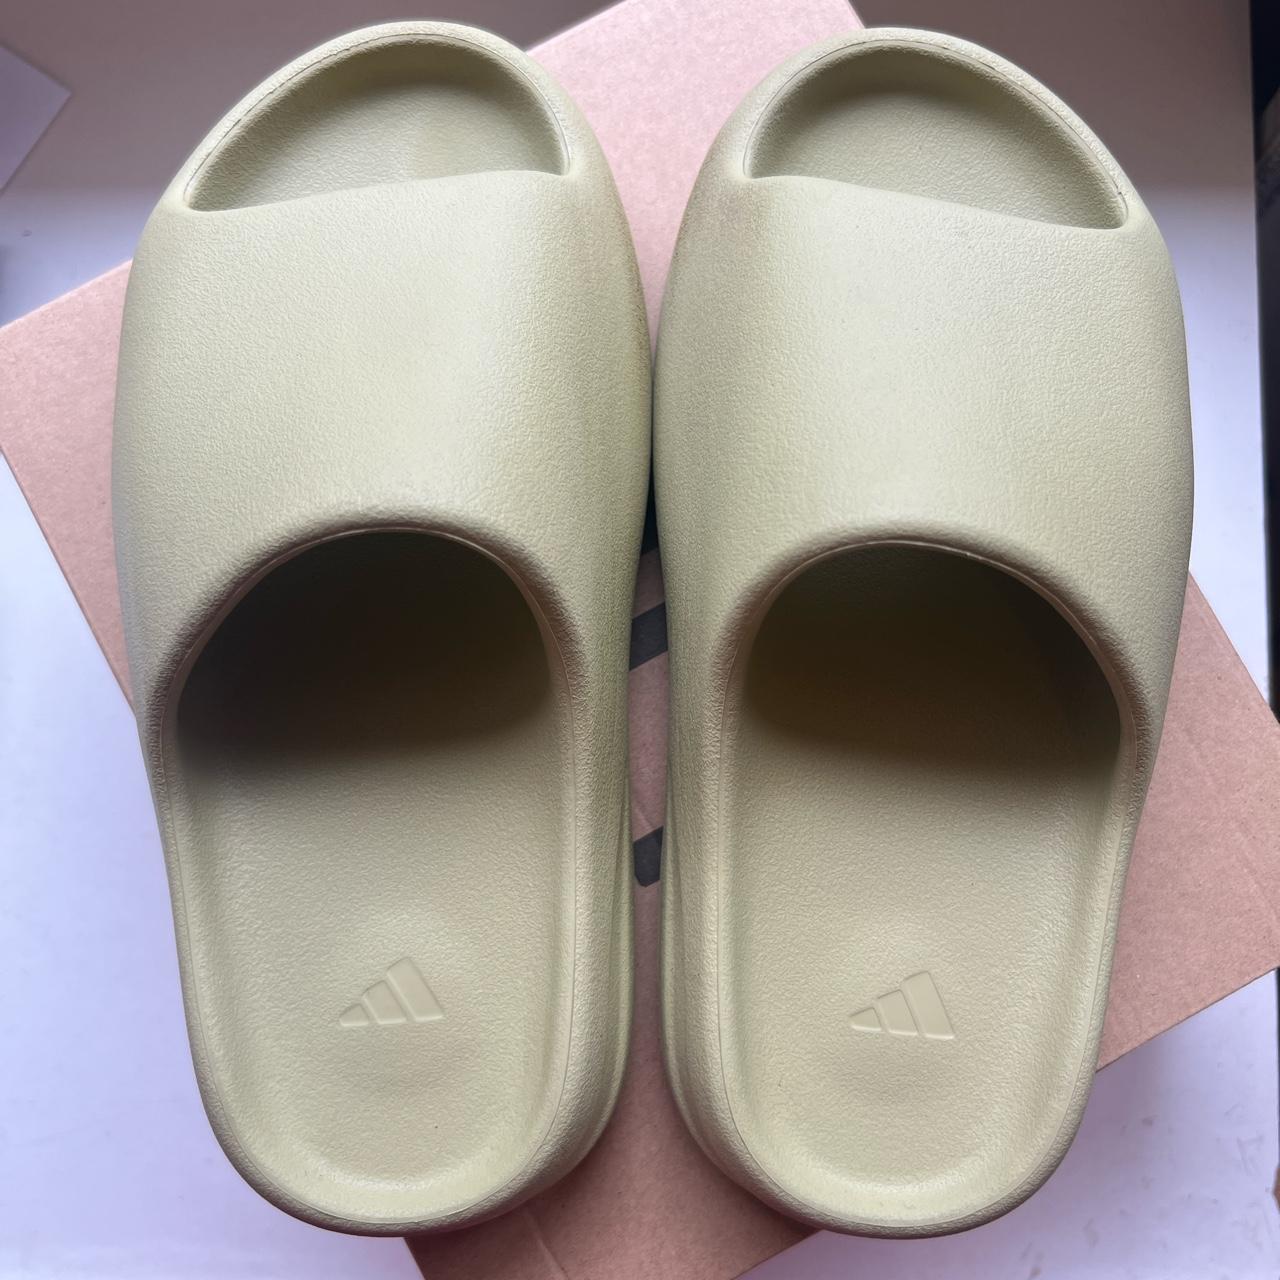 #YEEZY slides resin • size 5 • perfect condition... - Depop